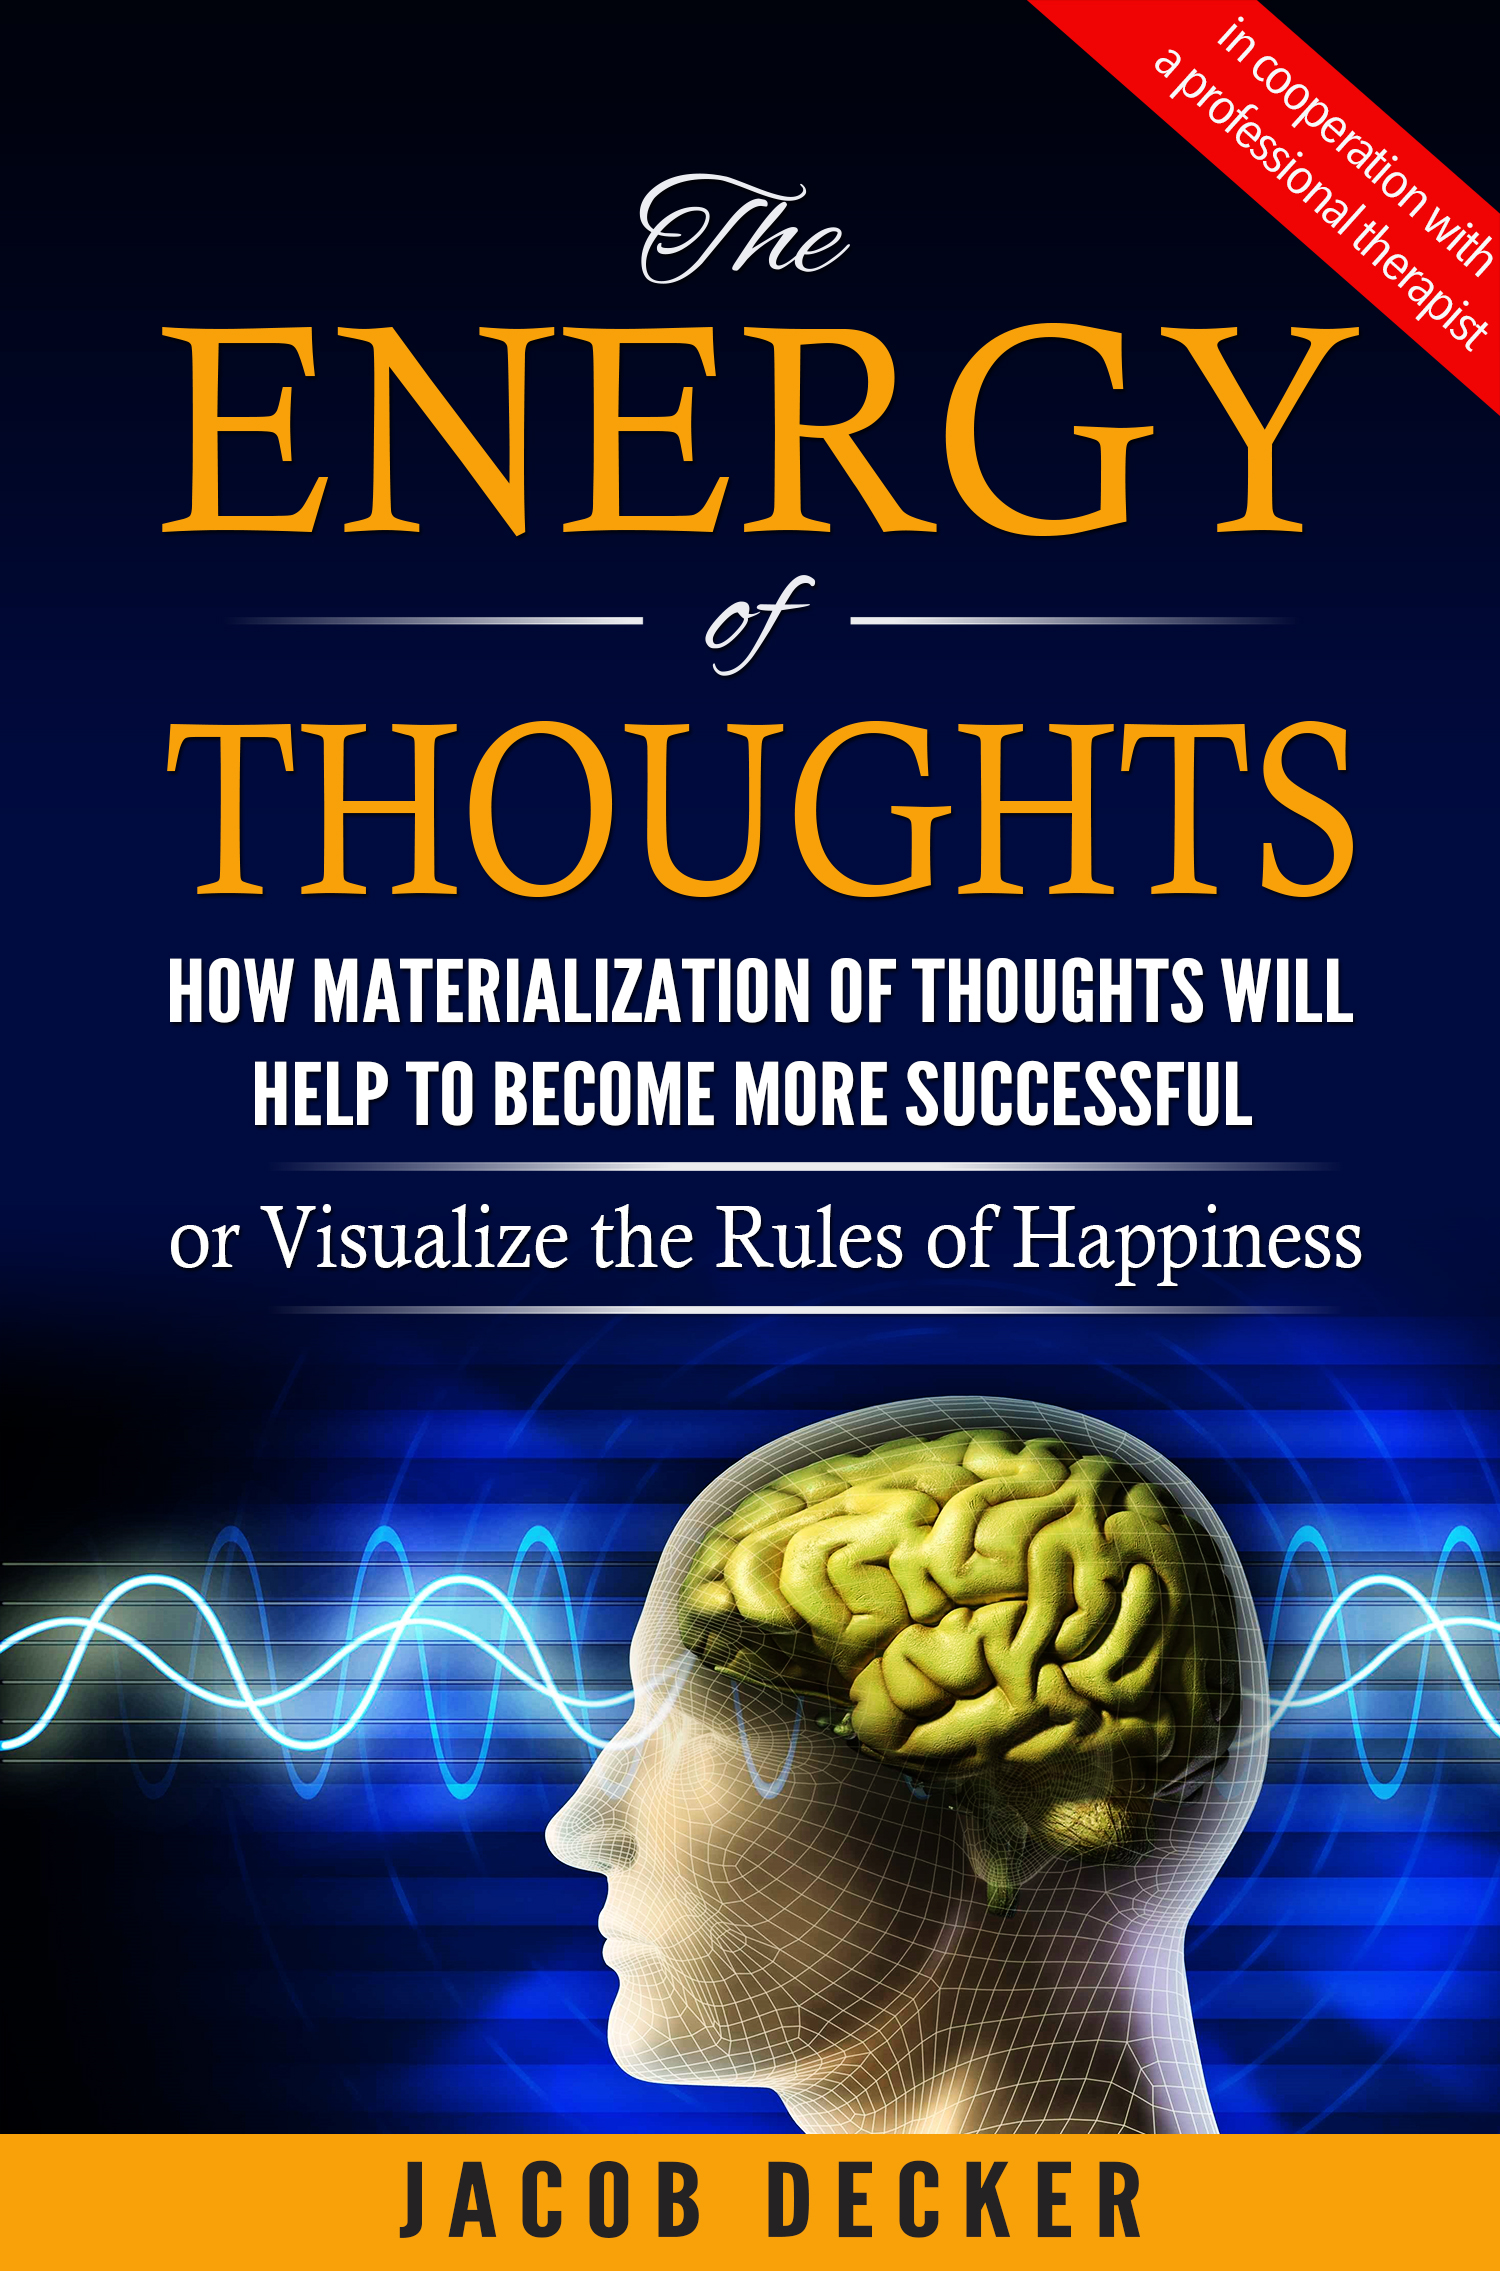 FREE: The Energy of thoughts:  How Materialization of thoughts will help to become more successful by Jacob Decker